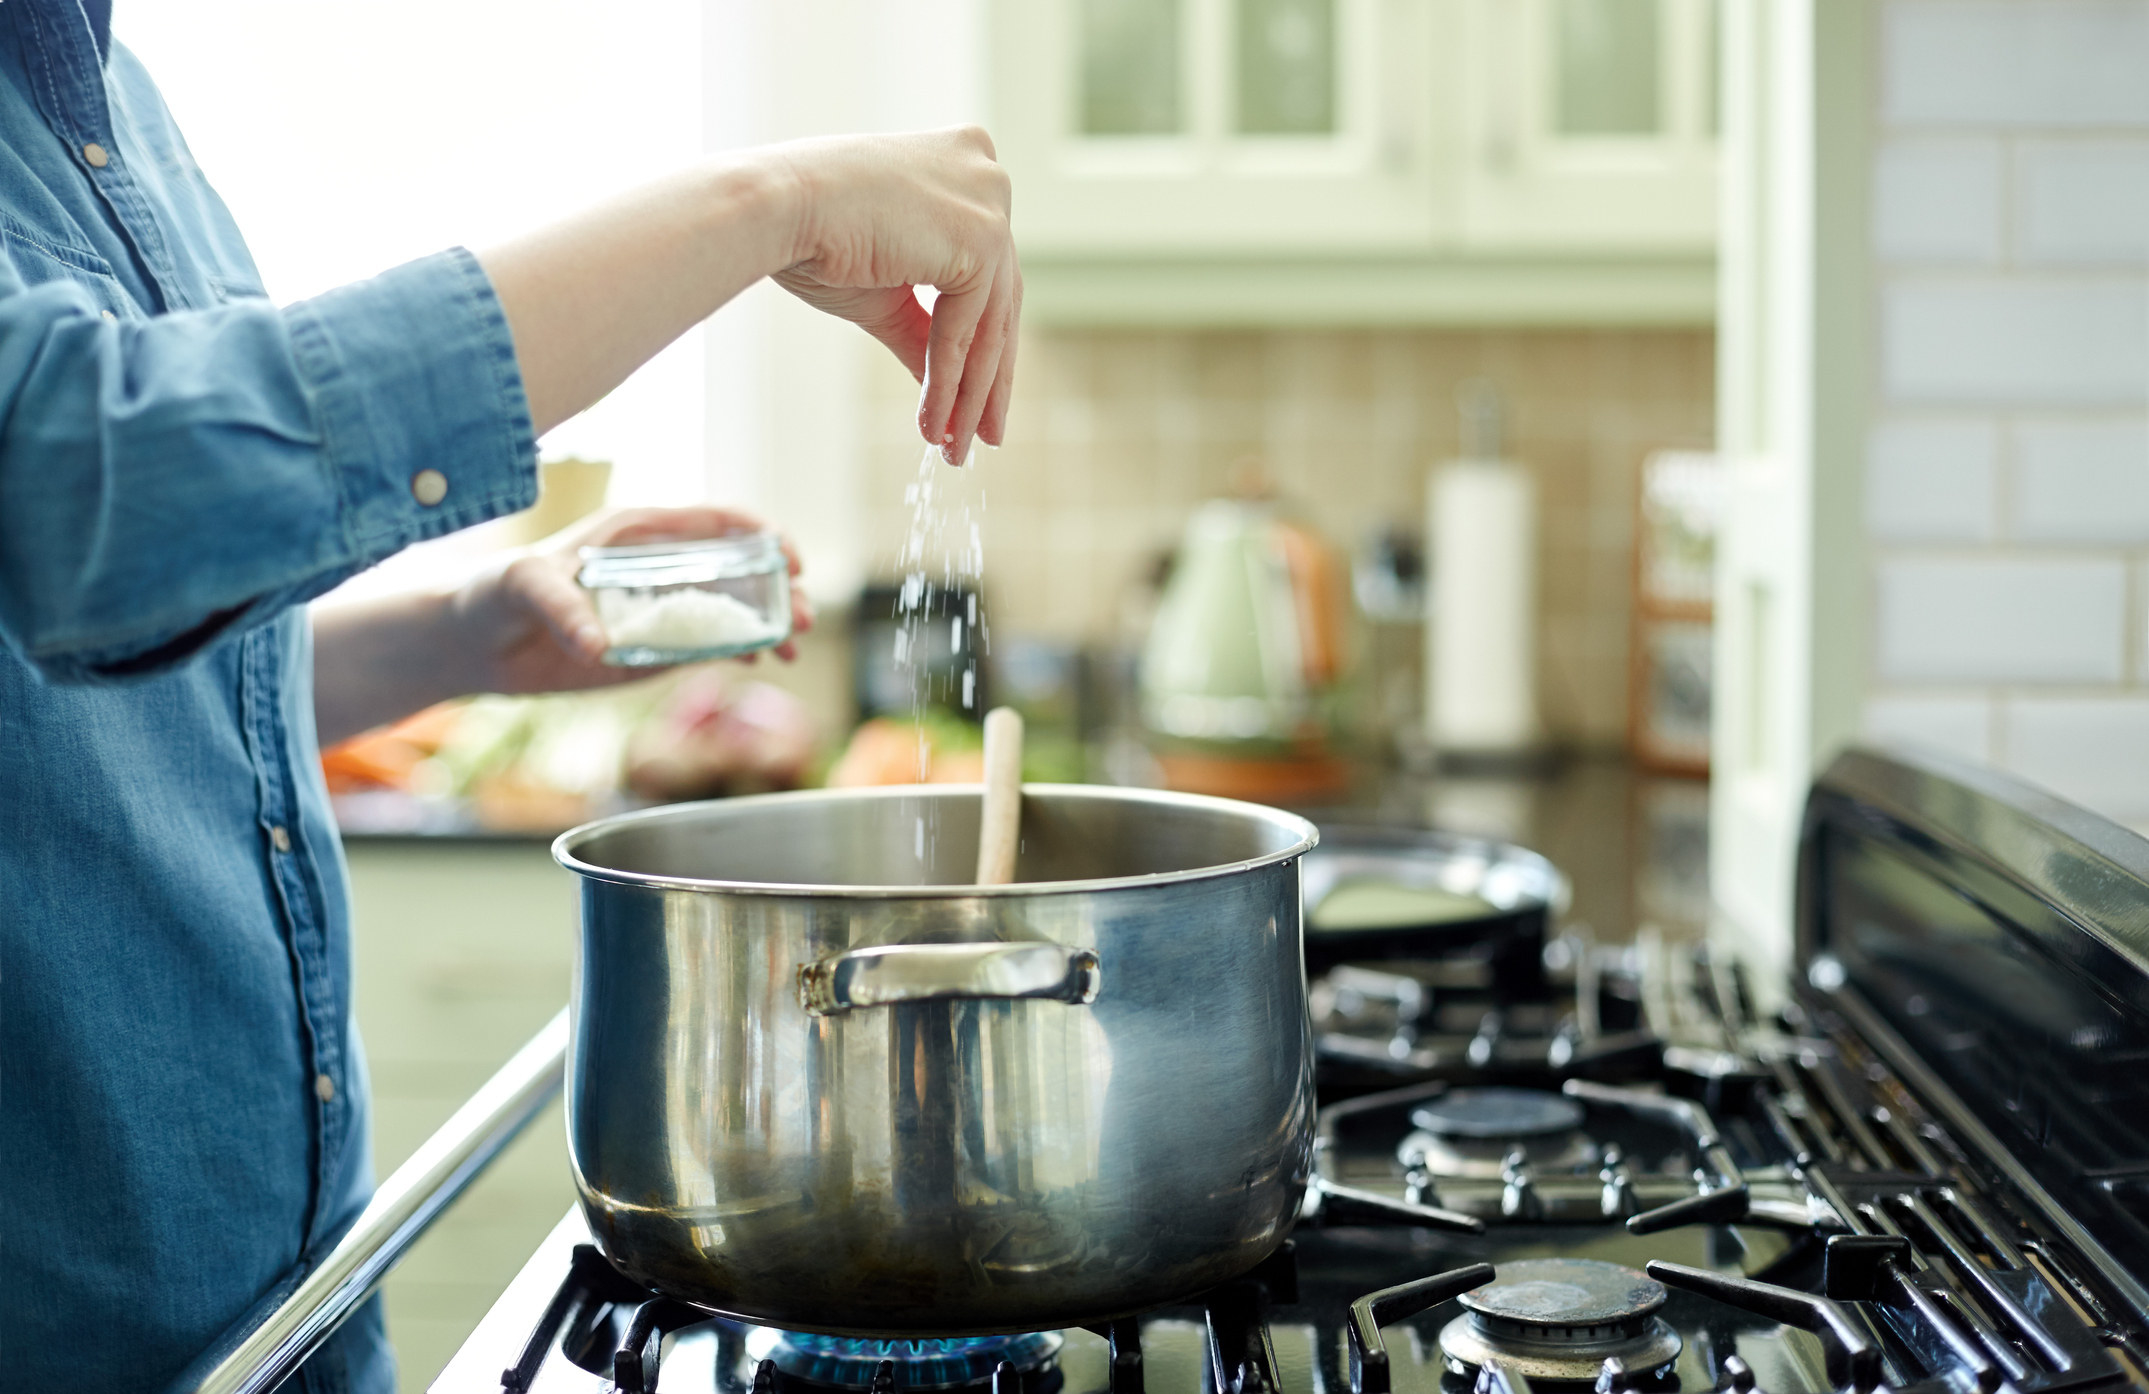 A person adding salt to a pot on the stove